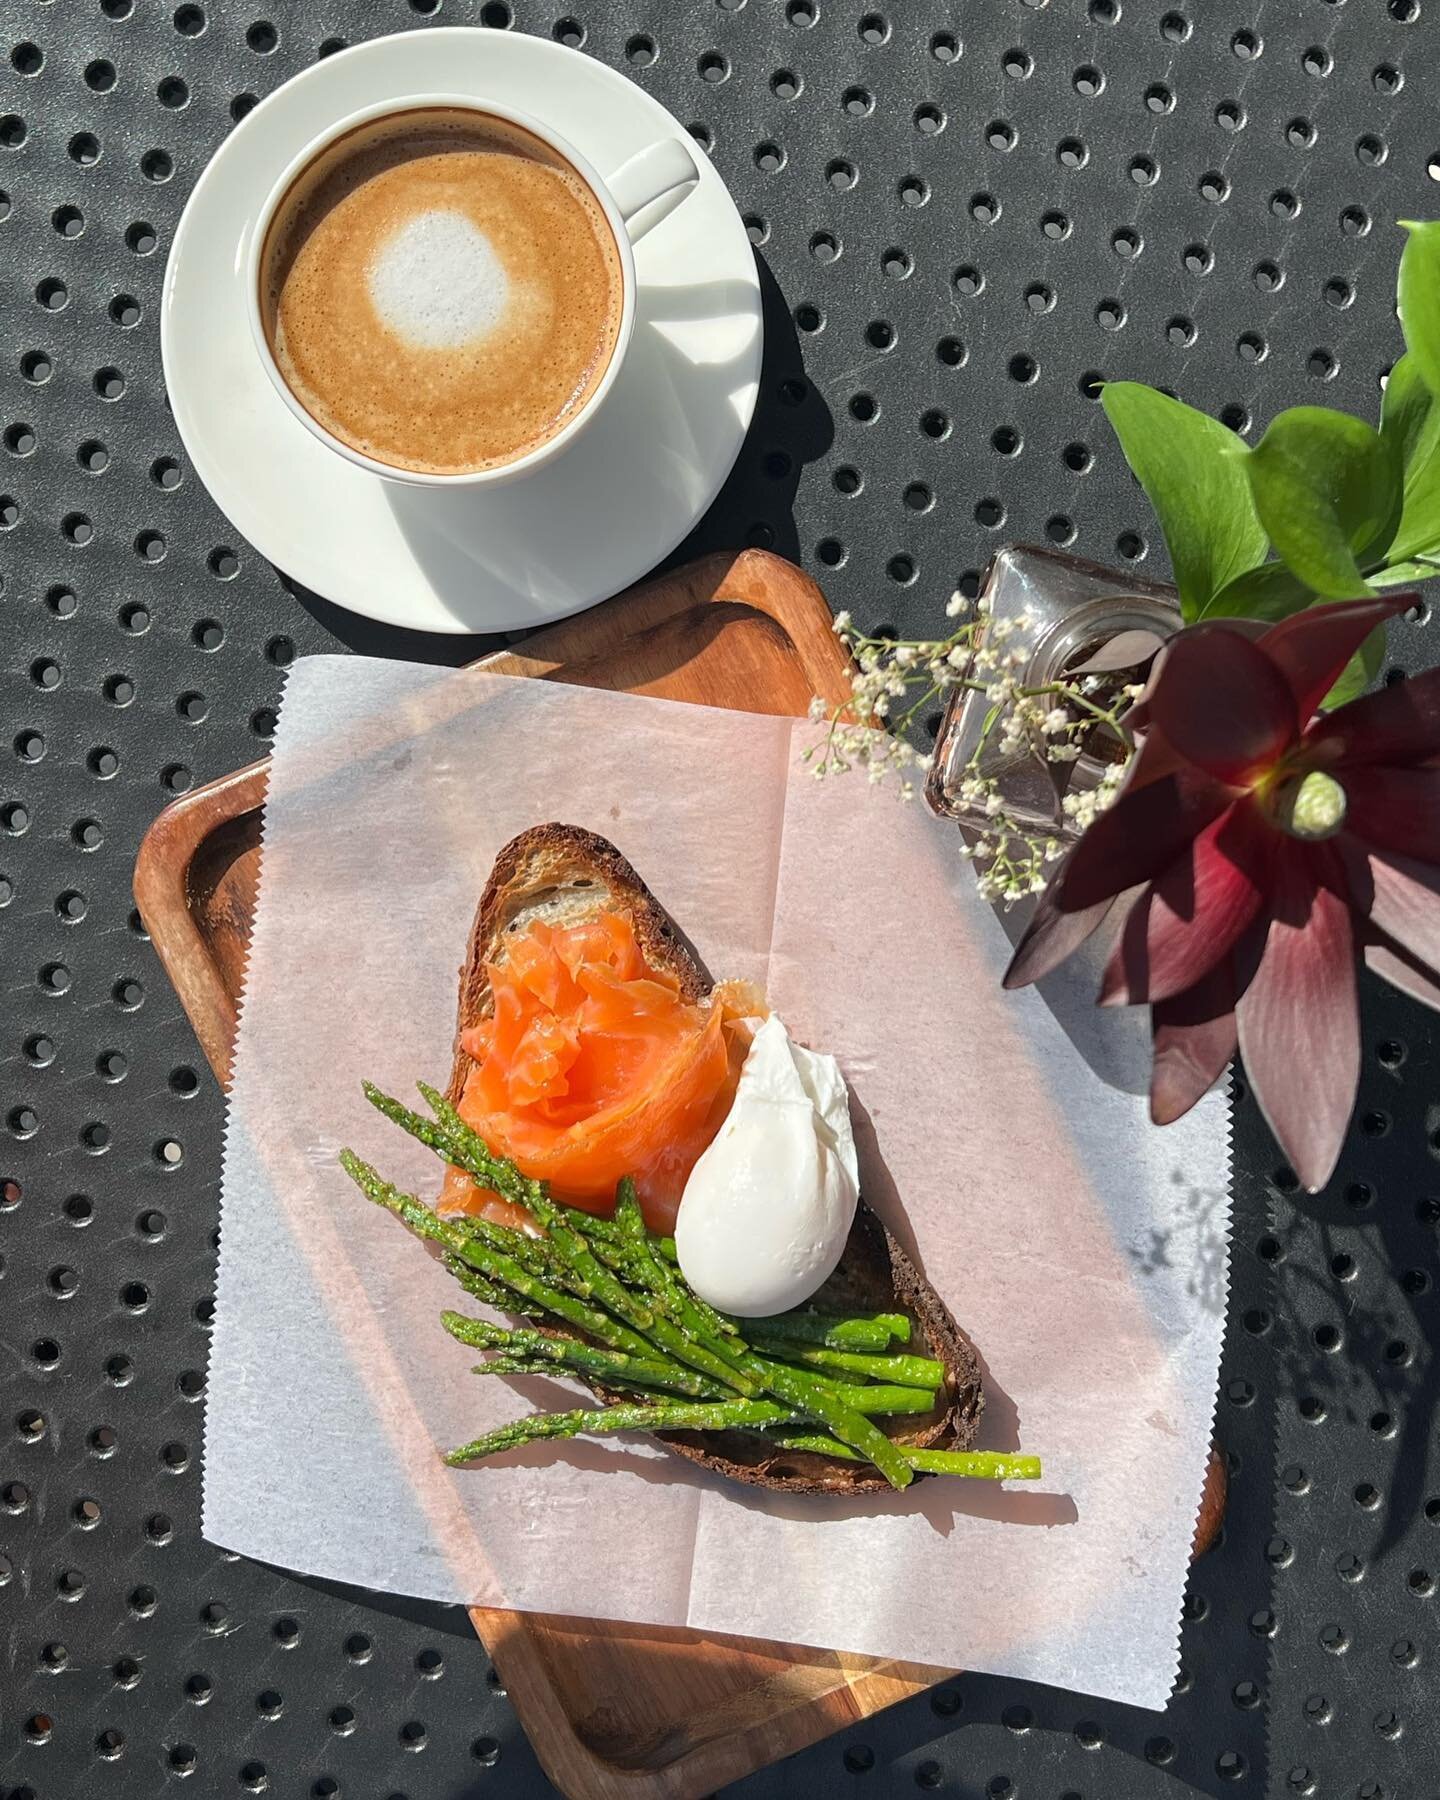 ☀️Rise + shine! ☀️
For a fulfilling + quick breakfast, choose from a selection of our sandwiches + toasts you can take on the way to work or enjoy at your leisure with a cup of fresh brewed coffee. 🥪☕

&bull; Asparagus &amp; Smoked Salmon with horse